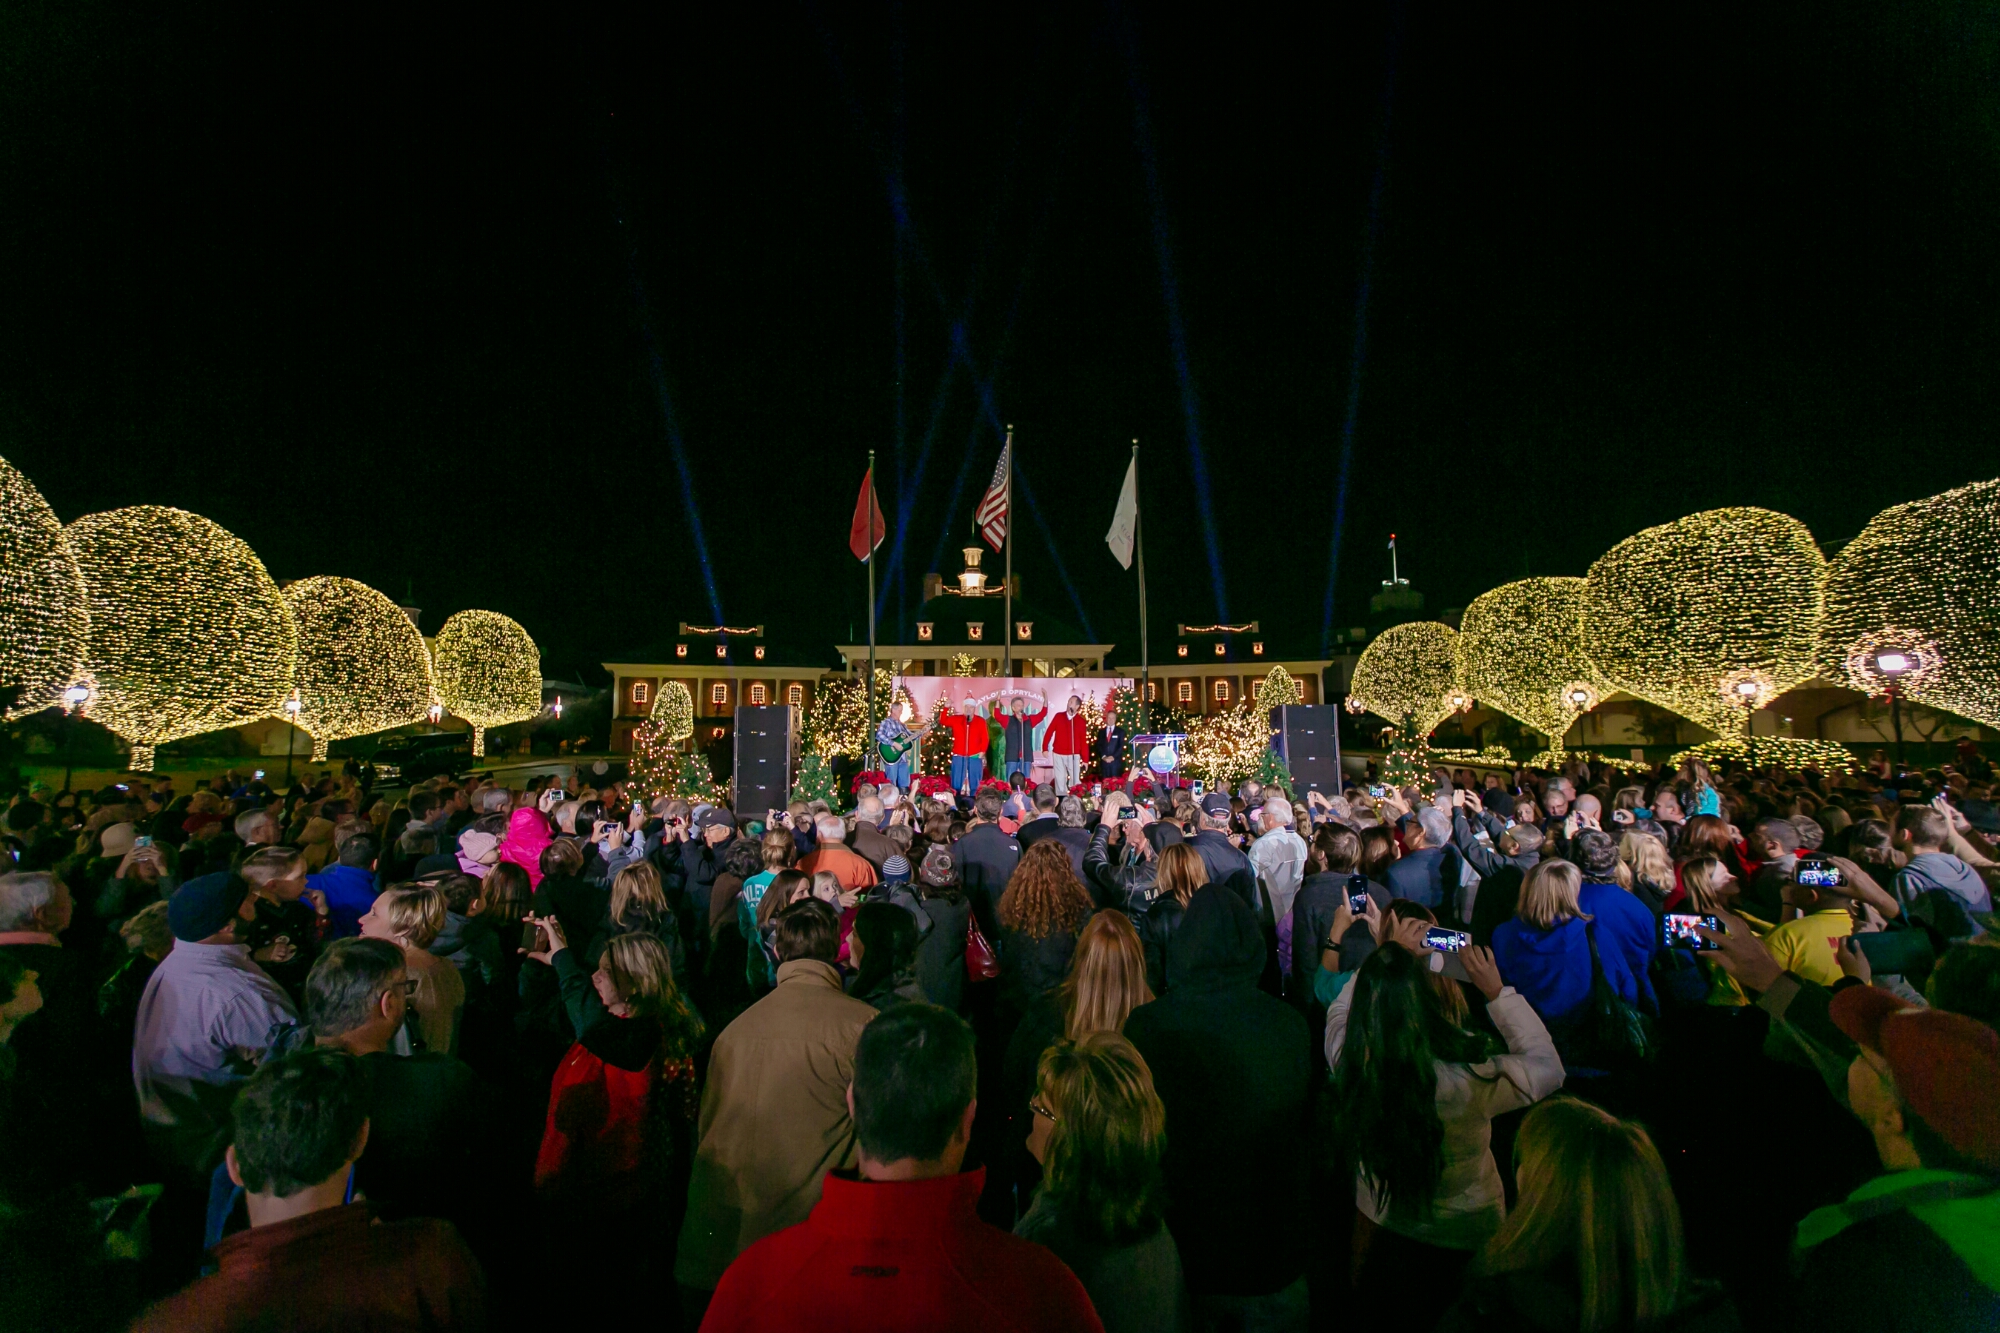 A Country Christmas at Gaylord Opryland Returns with 2.3 Million Lights